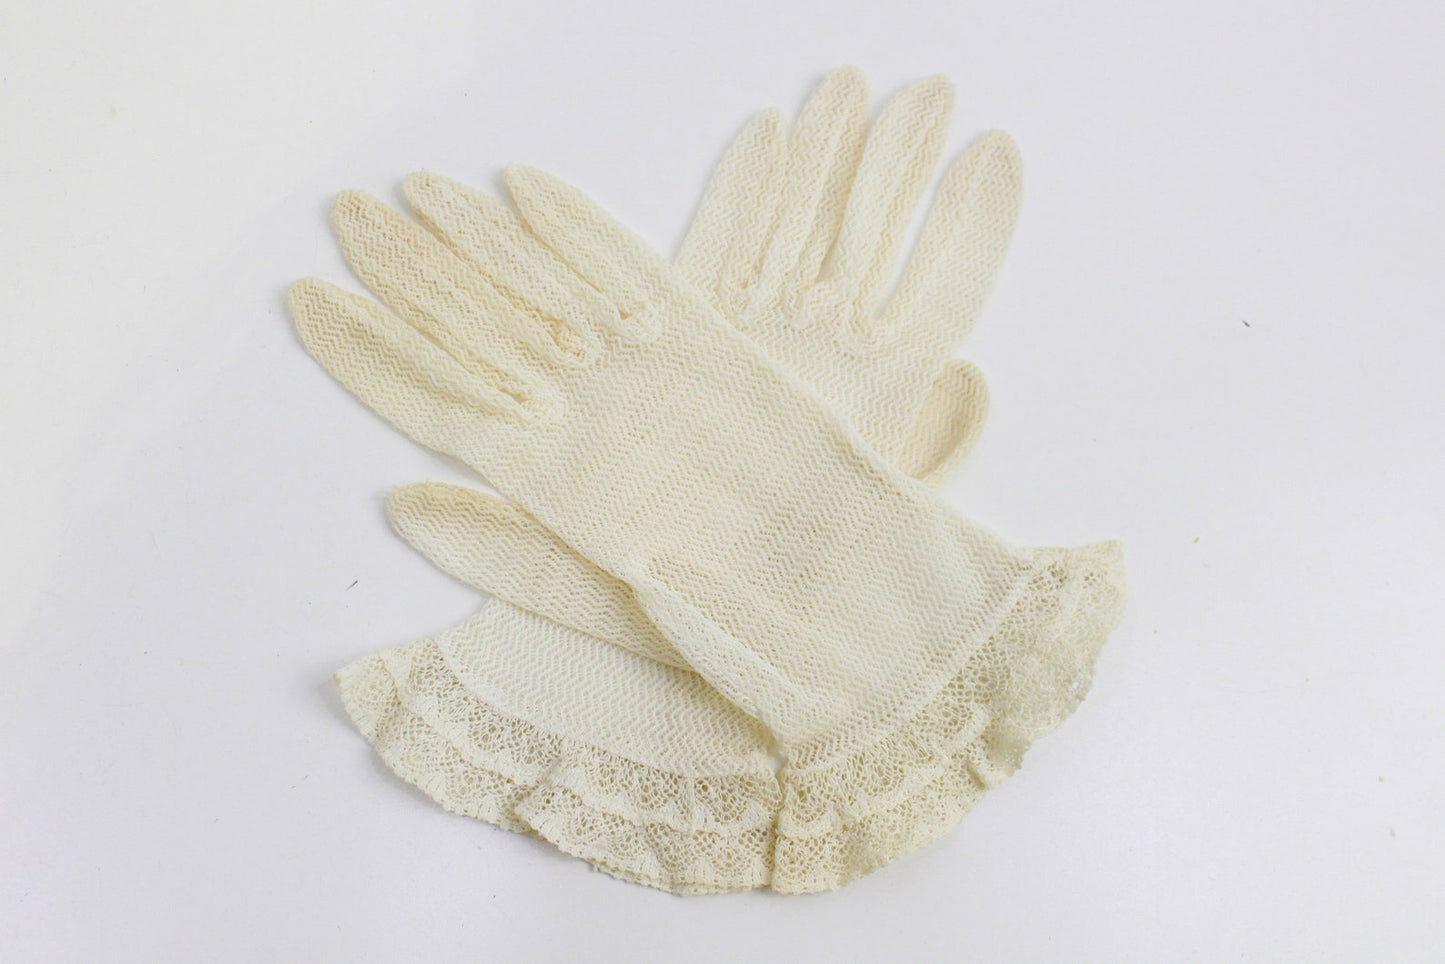 Vintage White Net Gloves with Lace Ruffle, Bridal Gloves, Mid Century Women's Dress Gloves